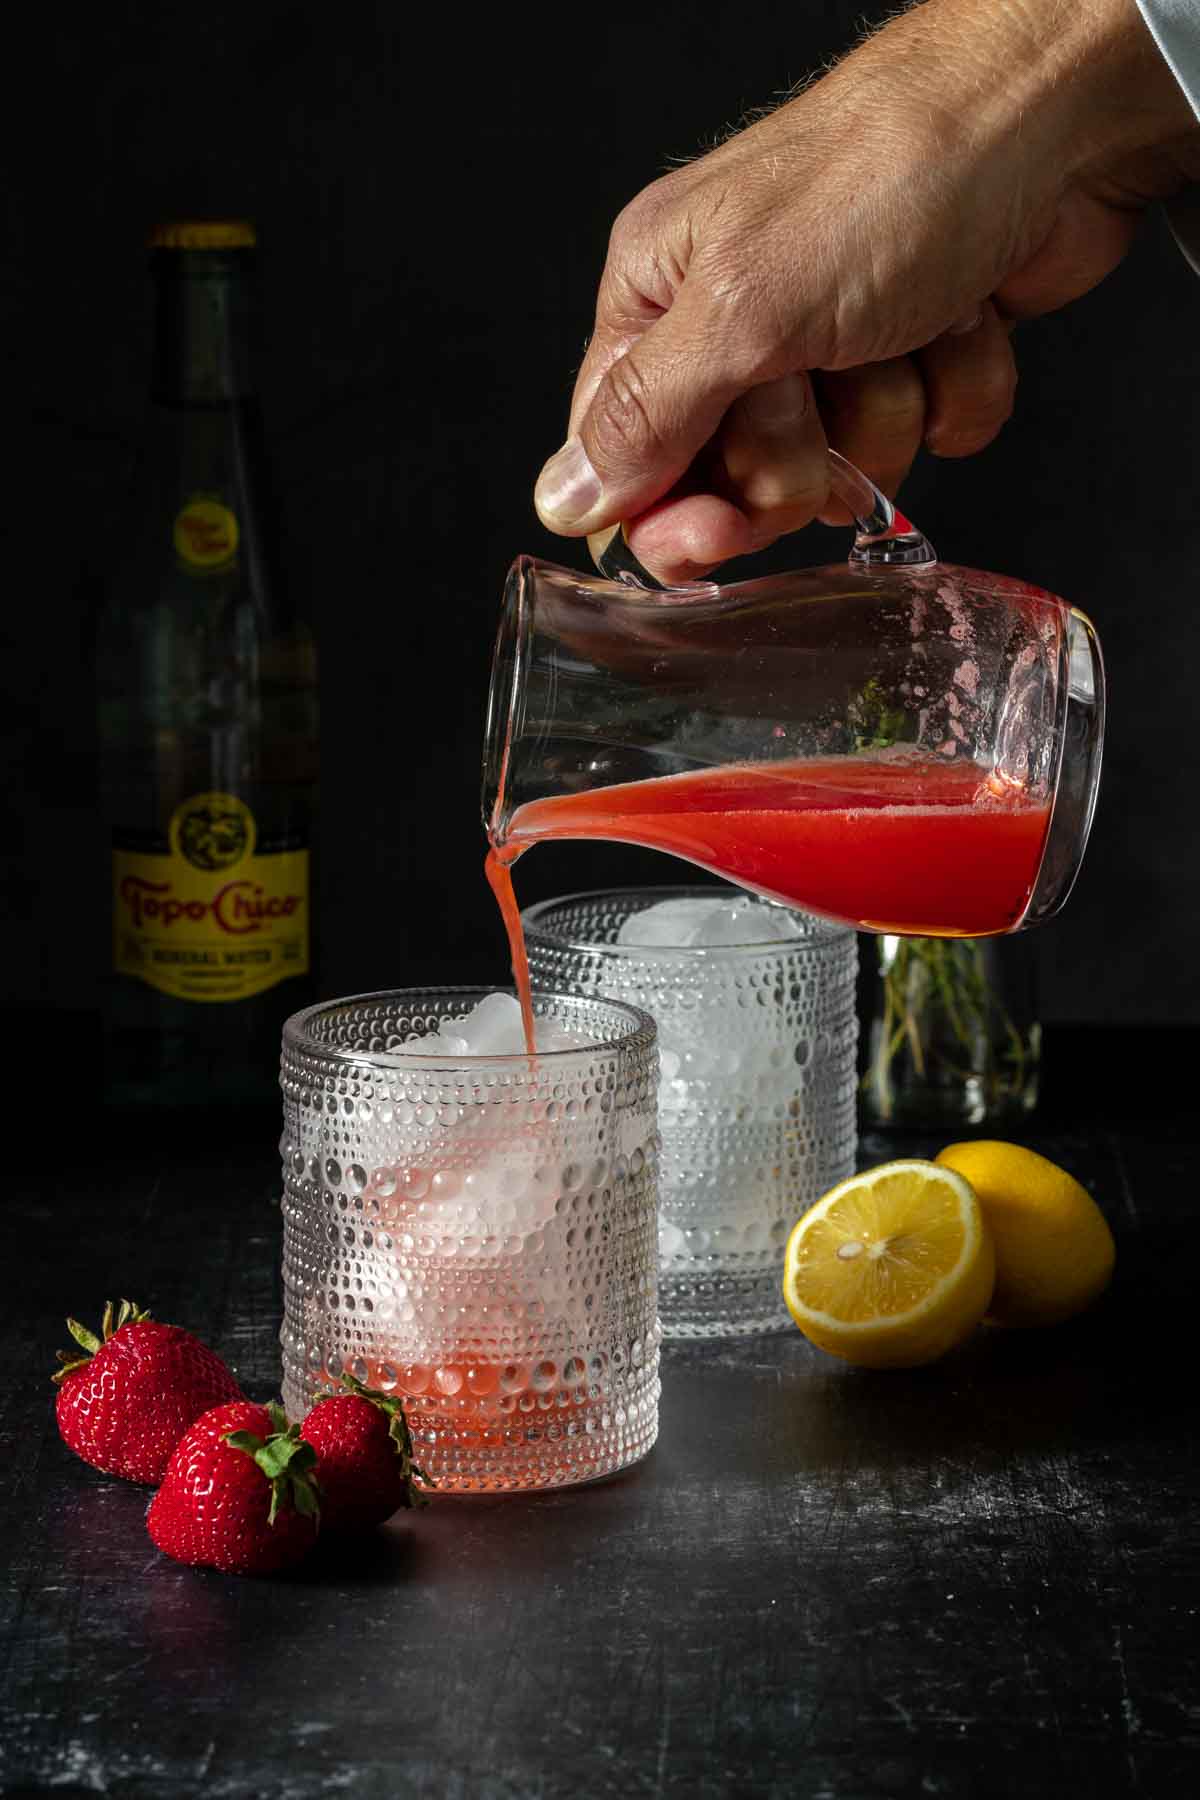 A hand pouring a red liquid into a textured cocktail glass with ice in it.